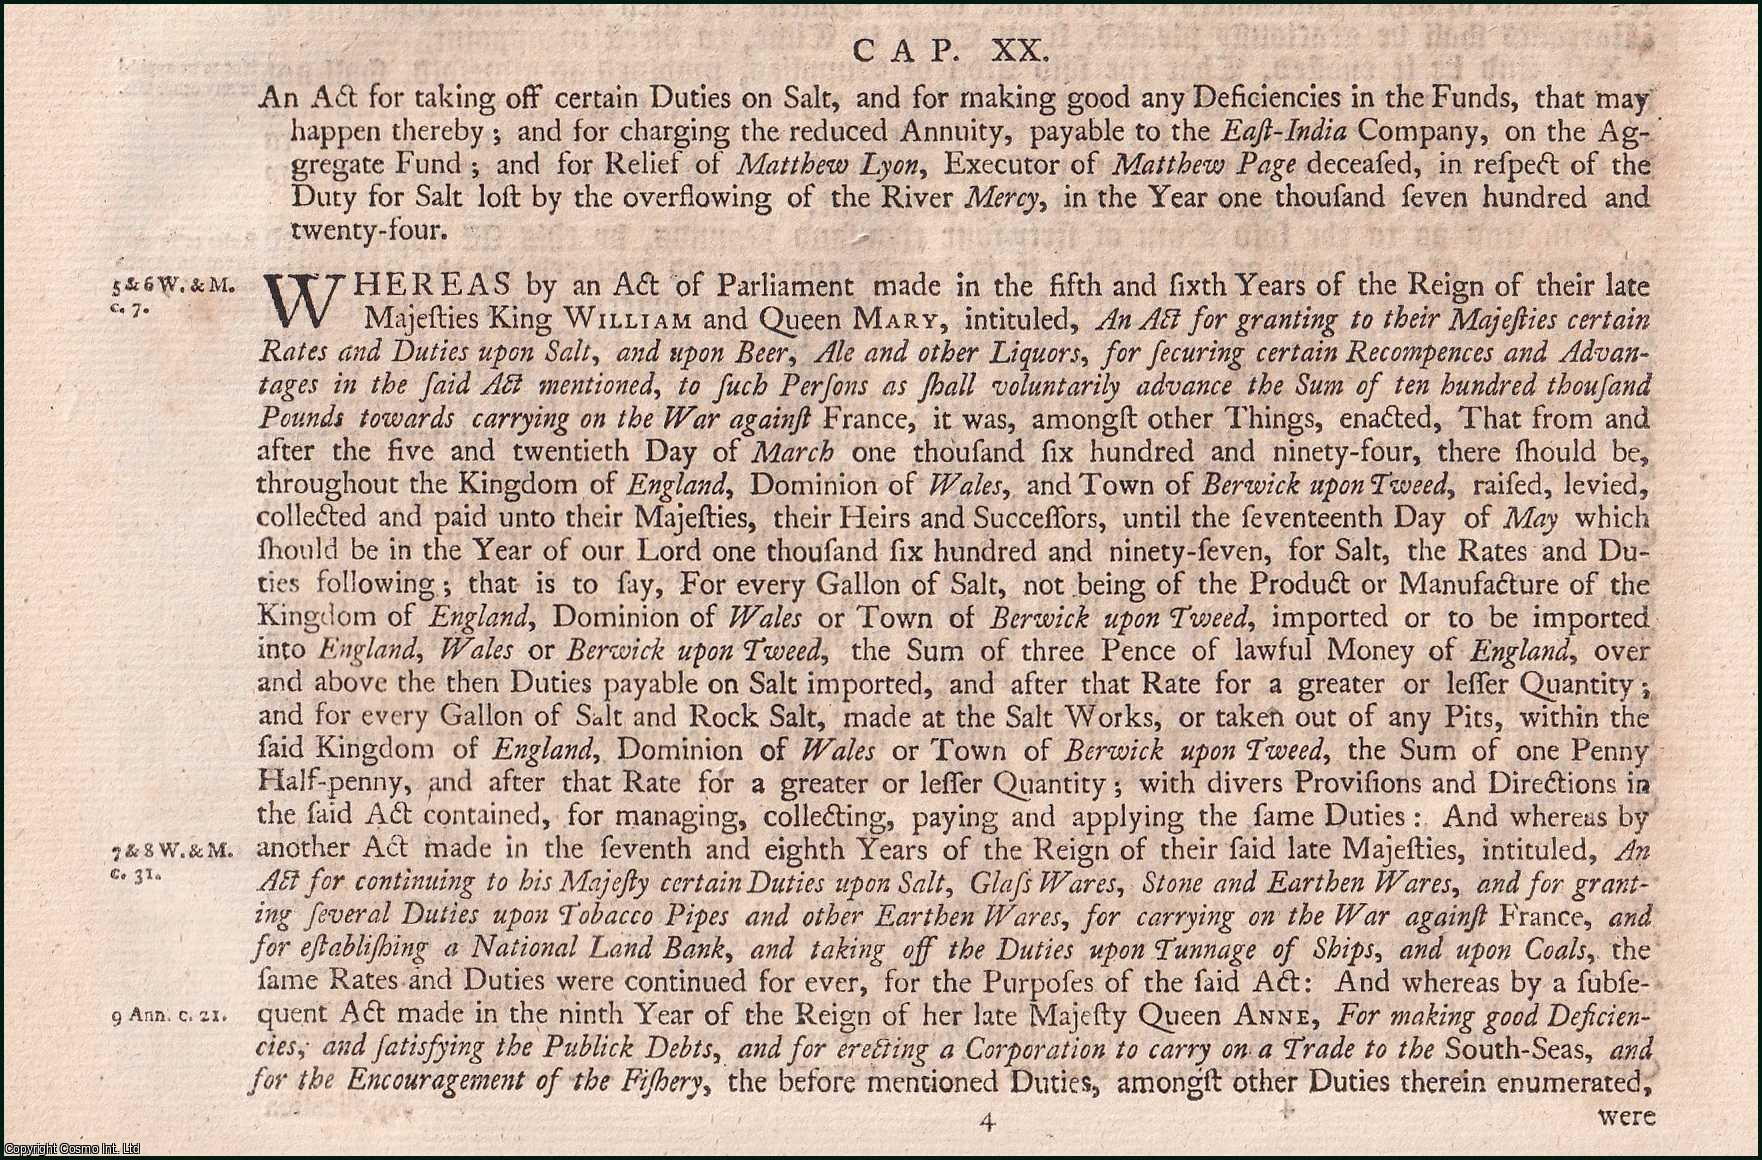 King George II - Salt Duties Act 1729. An Act for taking off certain Duties on Salt, and for making good any Deficiencies in the Funds, that may happen thereby; and for charging the reduced Annuity, payable to the East India Company, on the Aggregate Fund; and for Relief of Matthew Lyon, Executor of Matthew Page deceased, in respect of the Duty for Salt, lost by the overflowing of the River Mercy, in the Year One thousand seven hundred and twenty four.